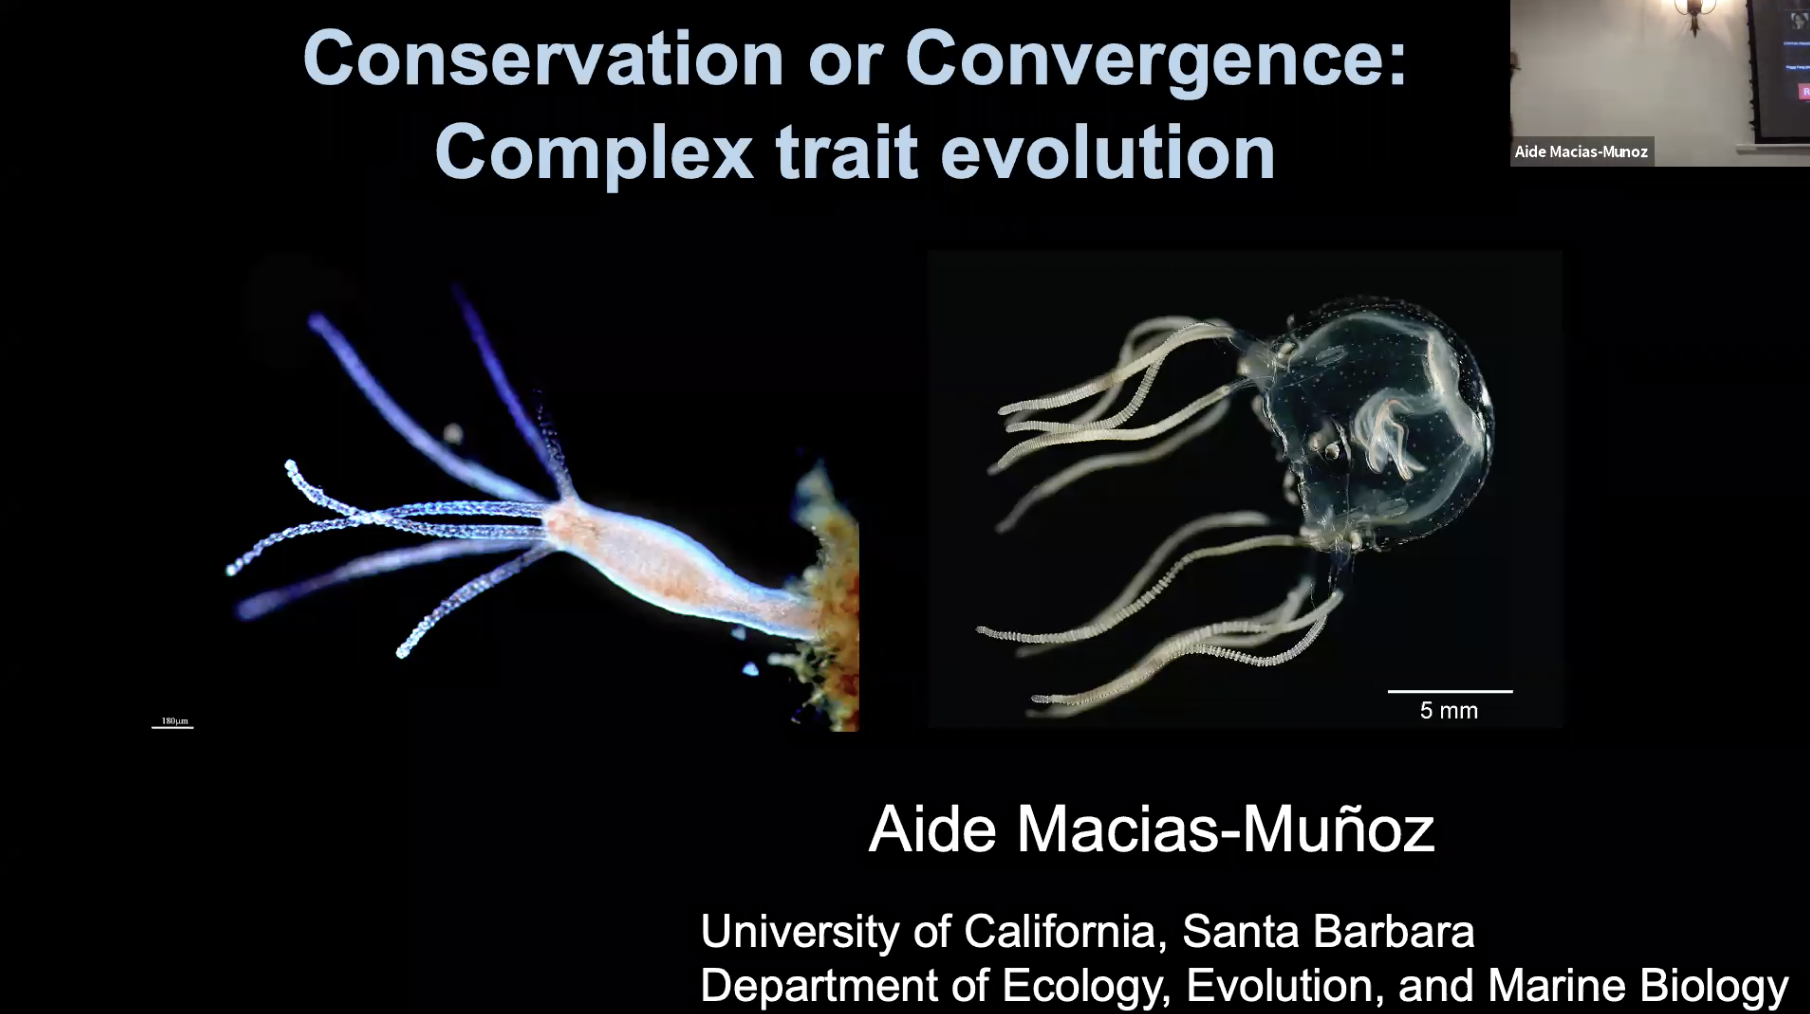 Conservation or Convergence: Complex trait evolution in Cnidaria